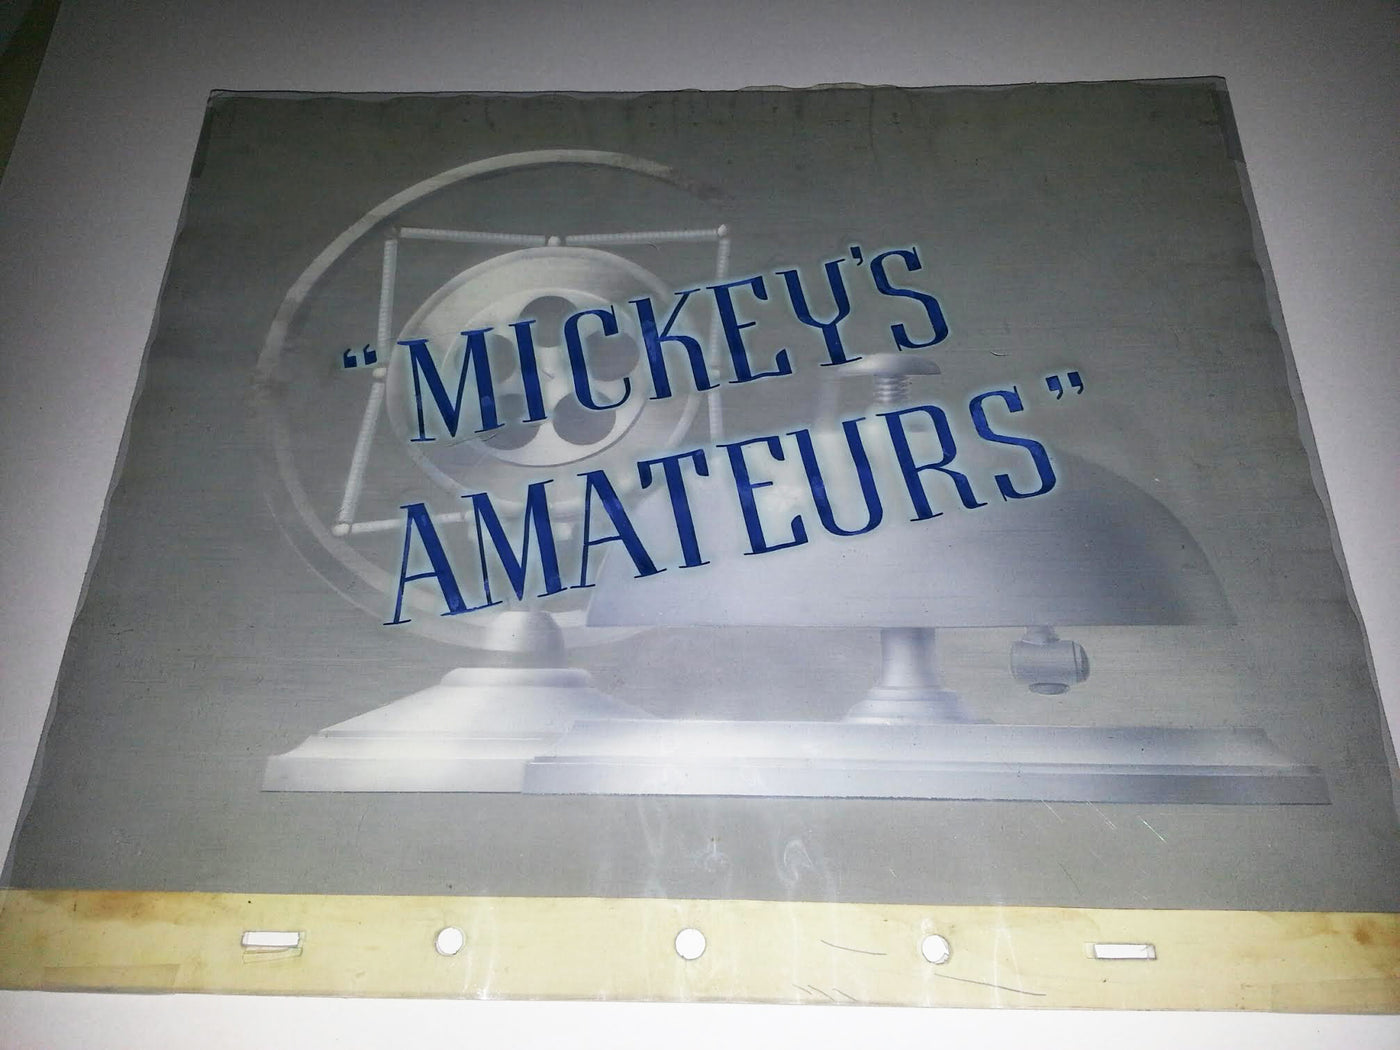 Original Walt Disney Title Cel and Background from Mickey's Amateurs (1937)